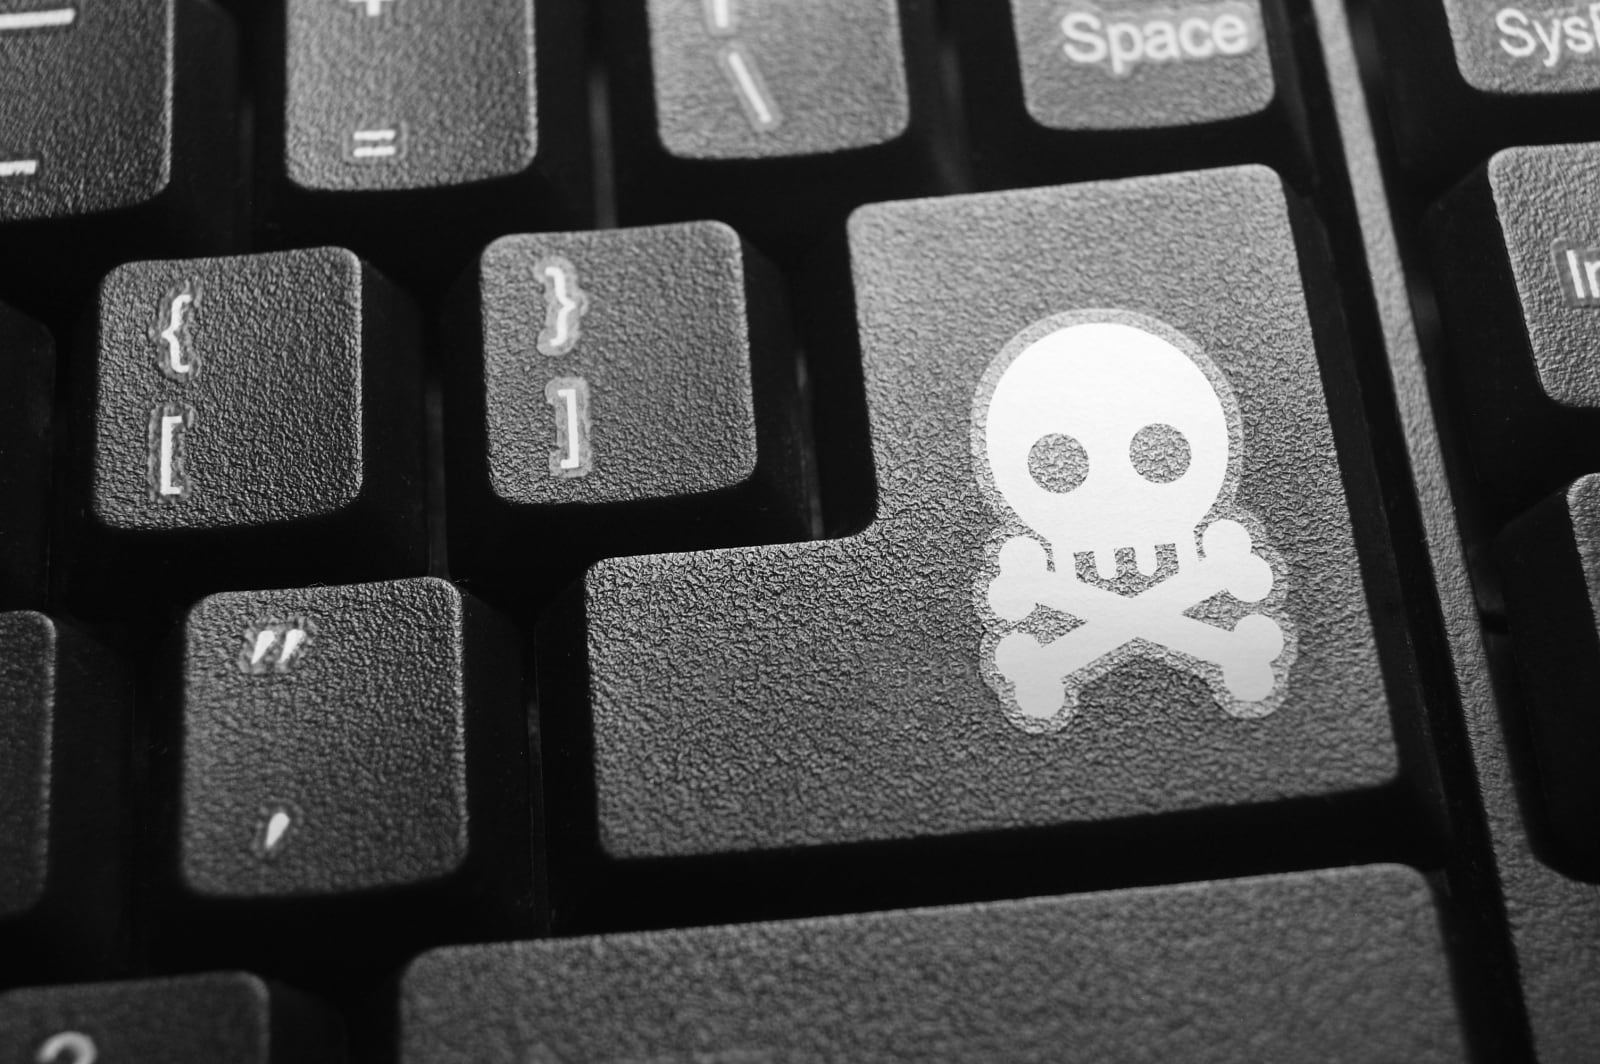 Skull and bones or piracy attack button on the keyboard